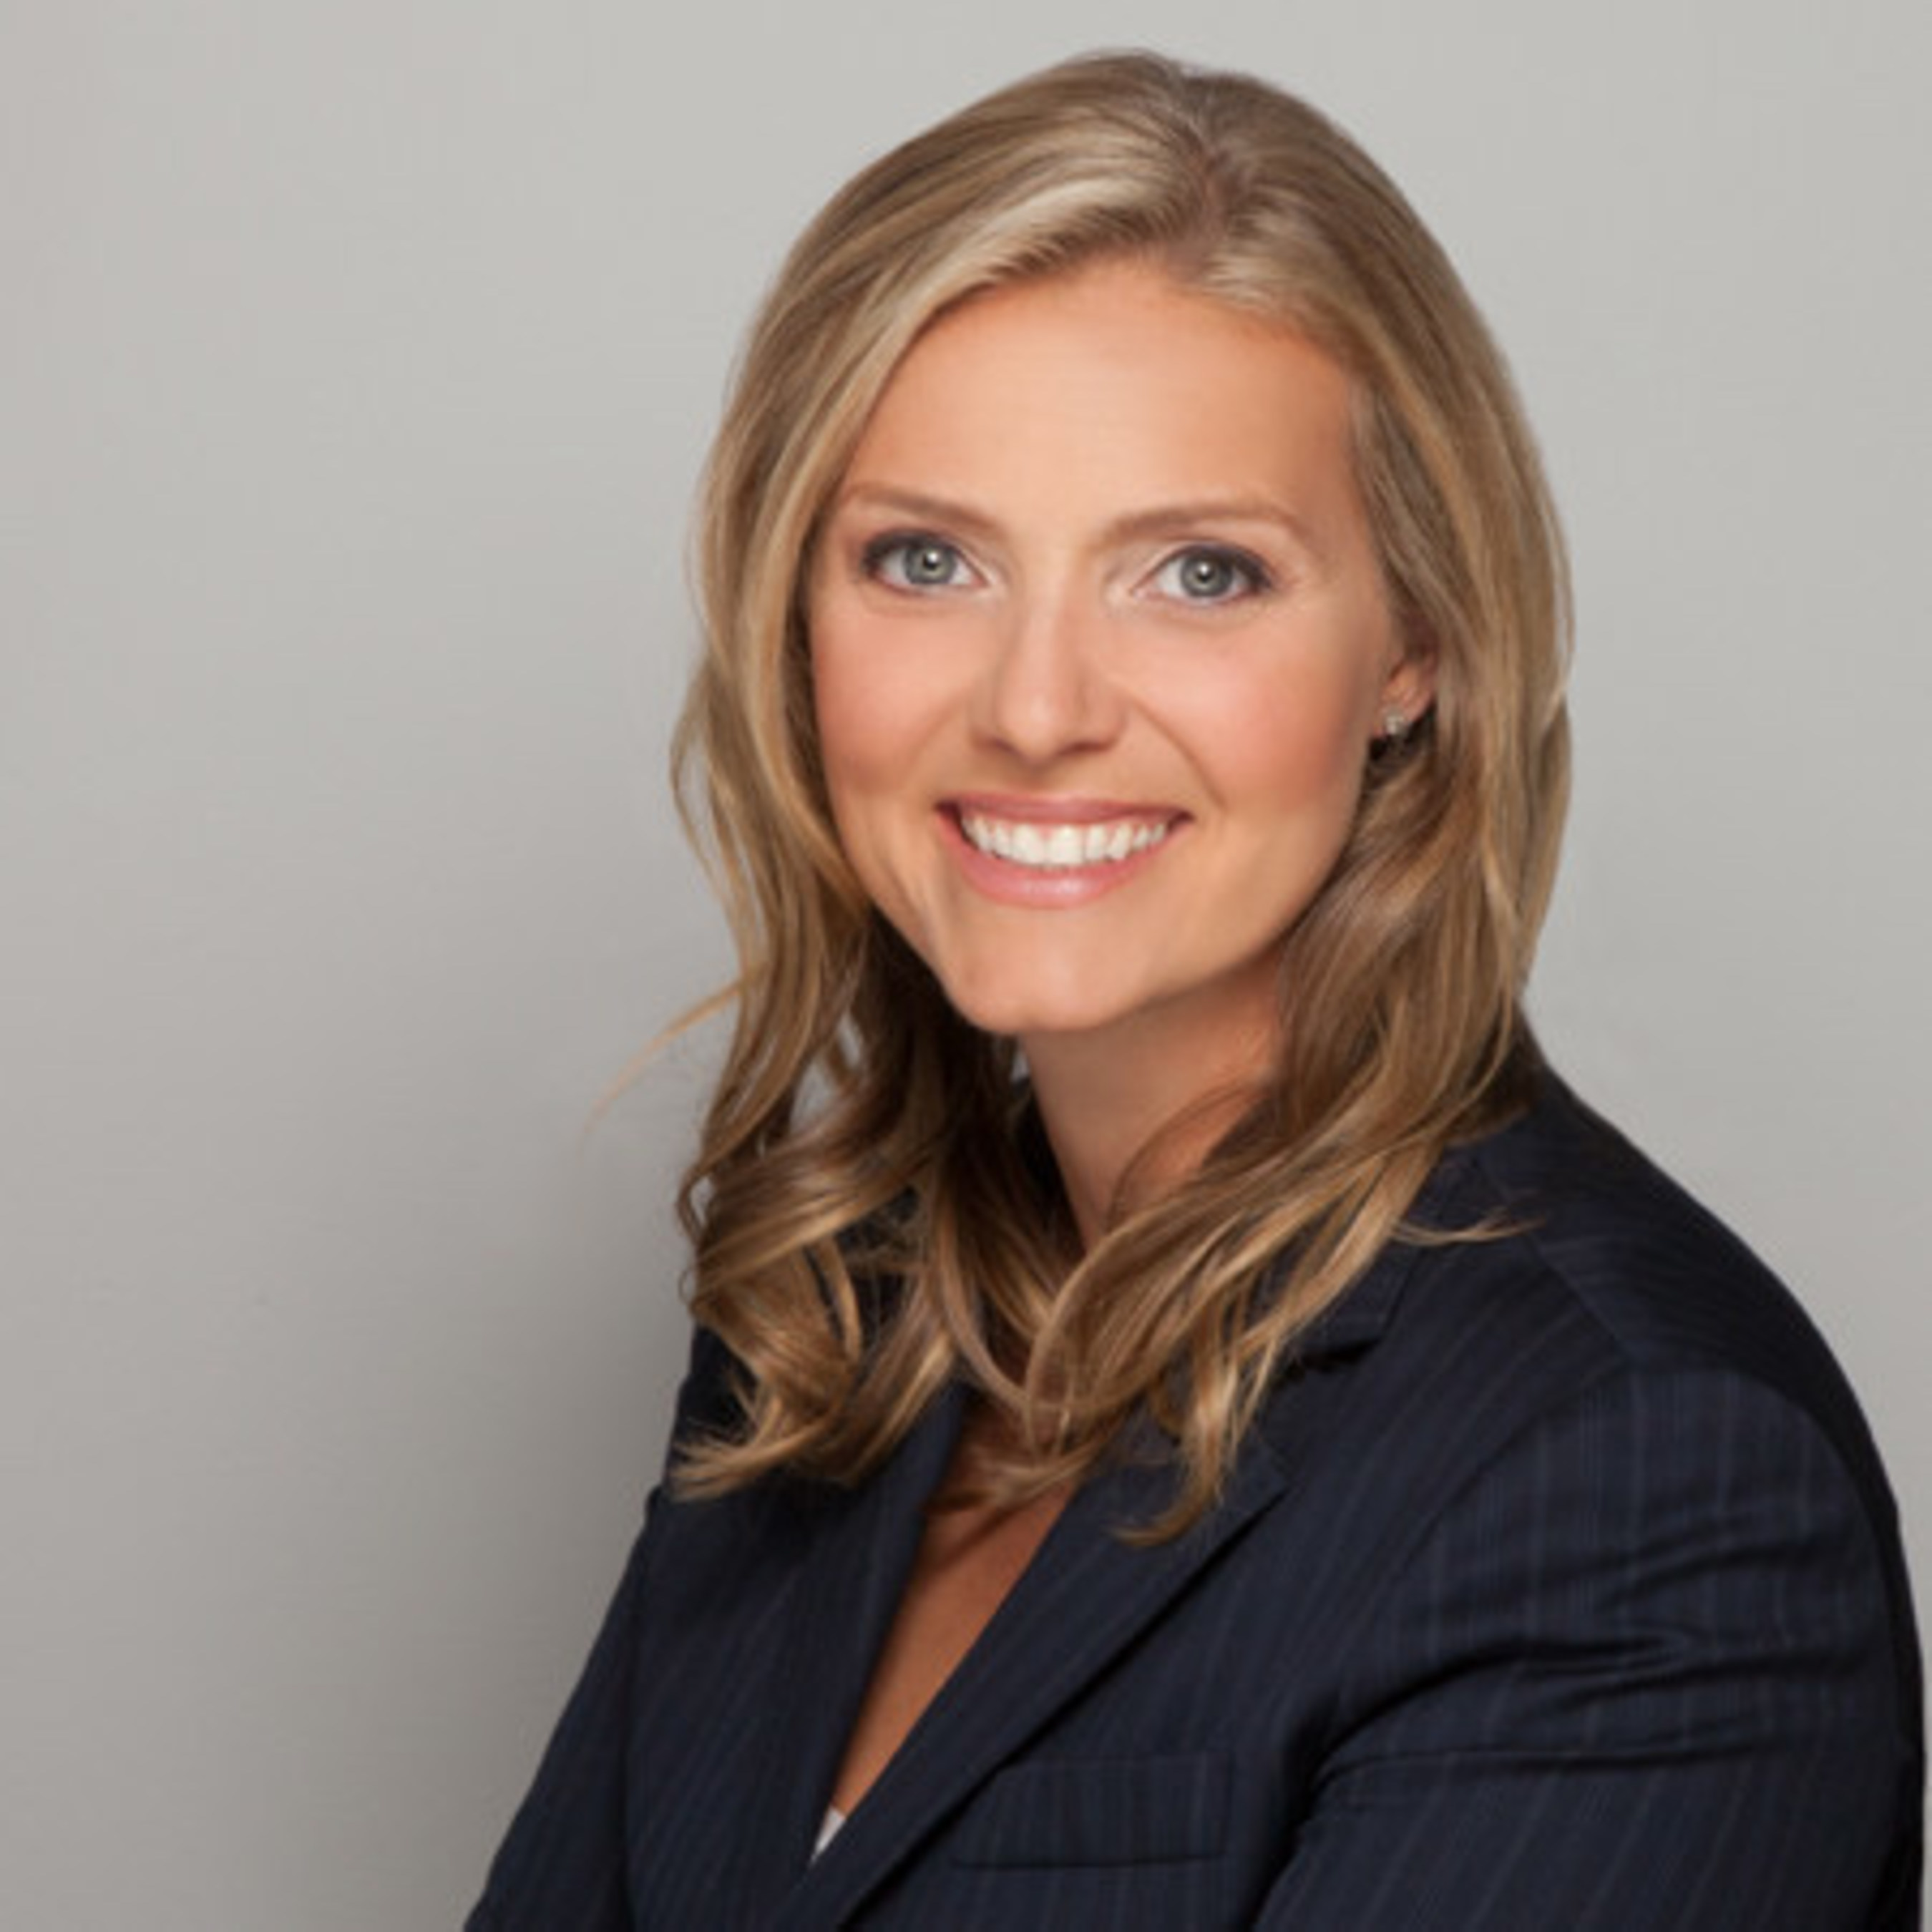 Ankura Consulting Group Appoints Cherie Schaible General Counsel